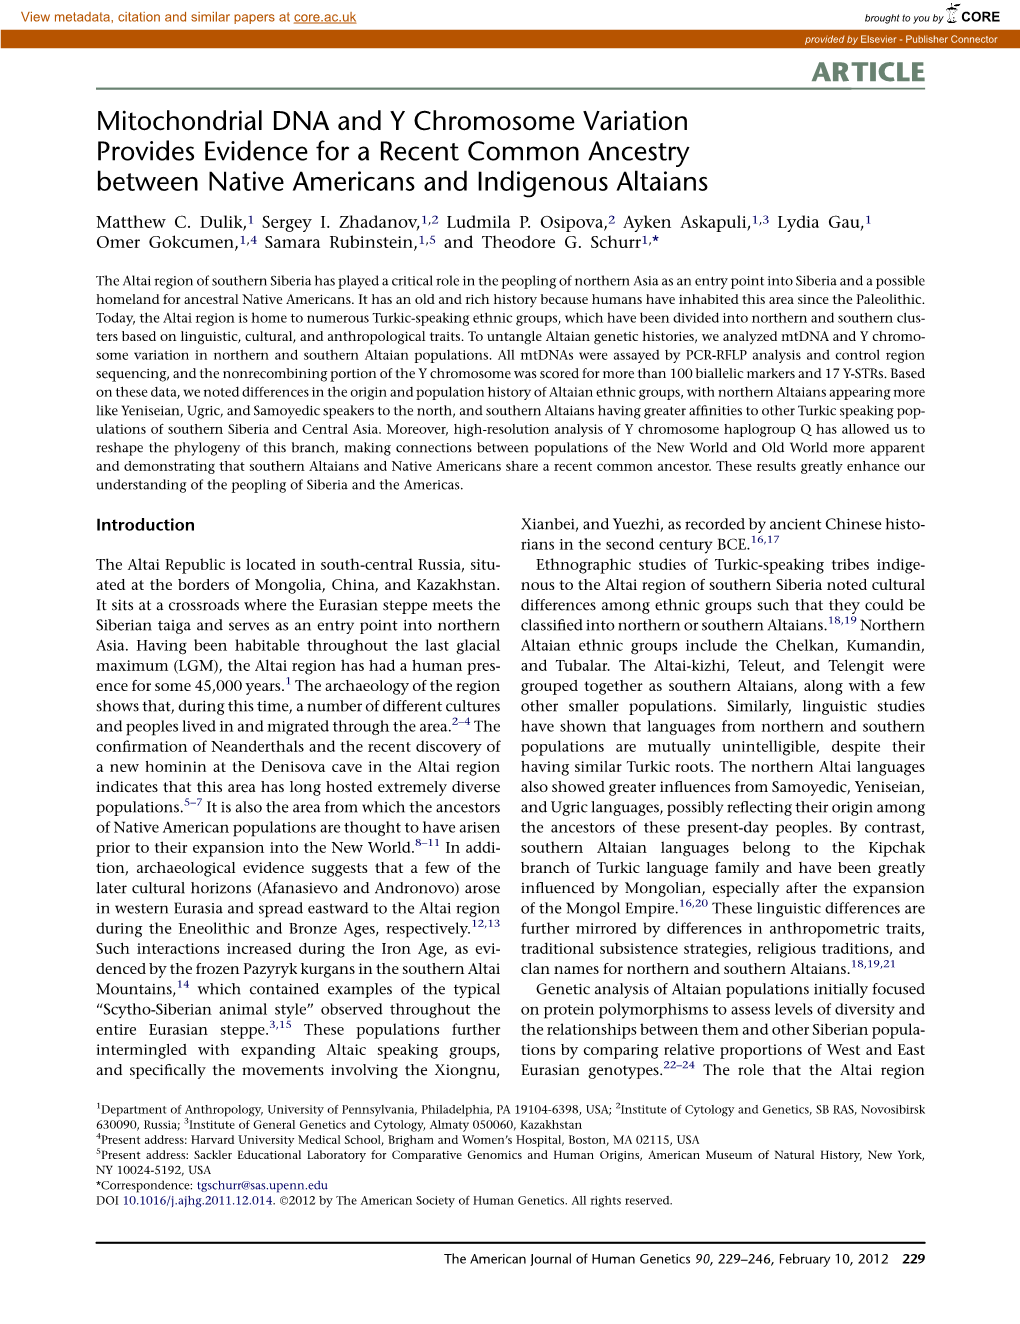 Mitochondrial DNA and Y Chromosome Variation Provides Evidence for a Recent Common Ancestry Between Native Americans and Indigenous Altaians